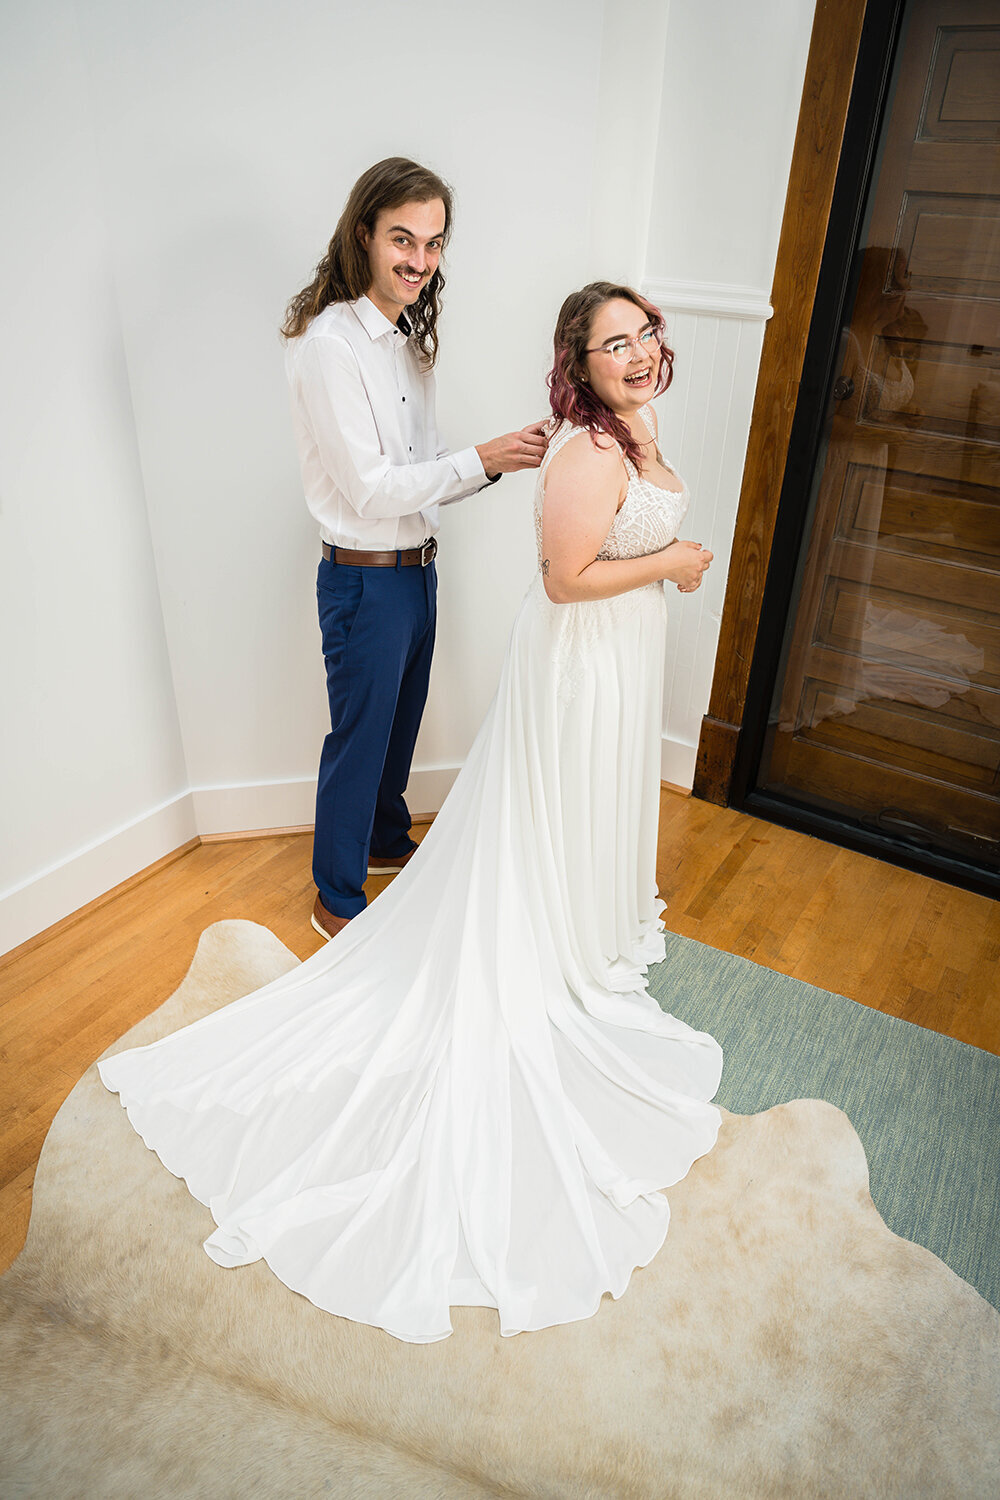 A marrier helps his partner get into her wedding dress by buttoning the back of her gown in a hotel room at Fire Station One in Roanoke, Virginia. The two smile upwards at the photographer (not photographed) taking their photo.